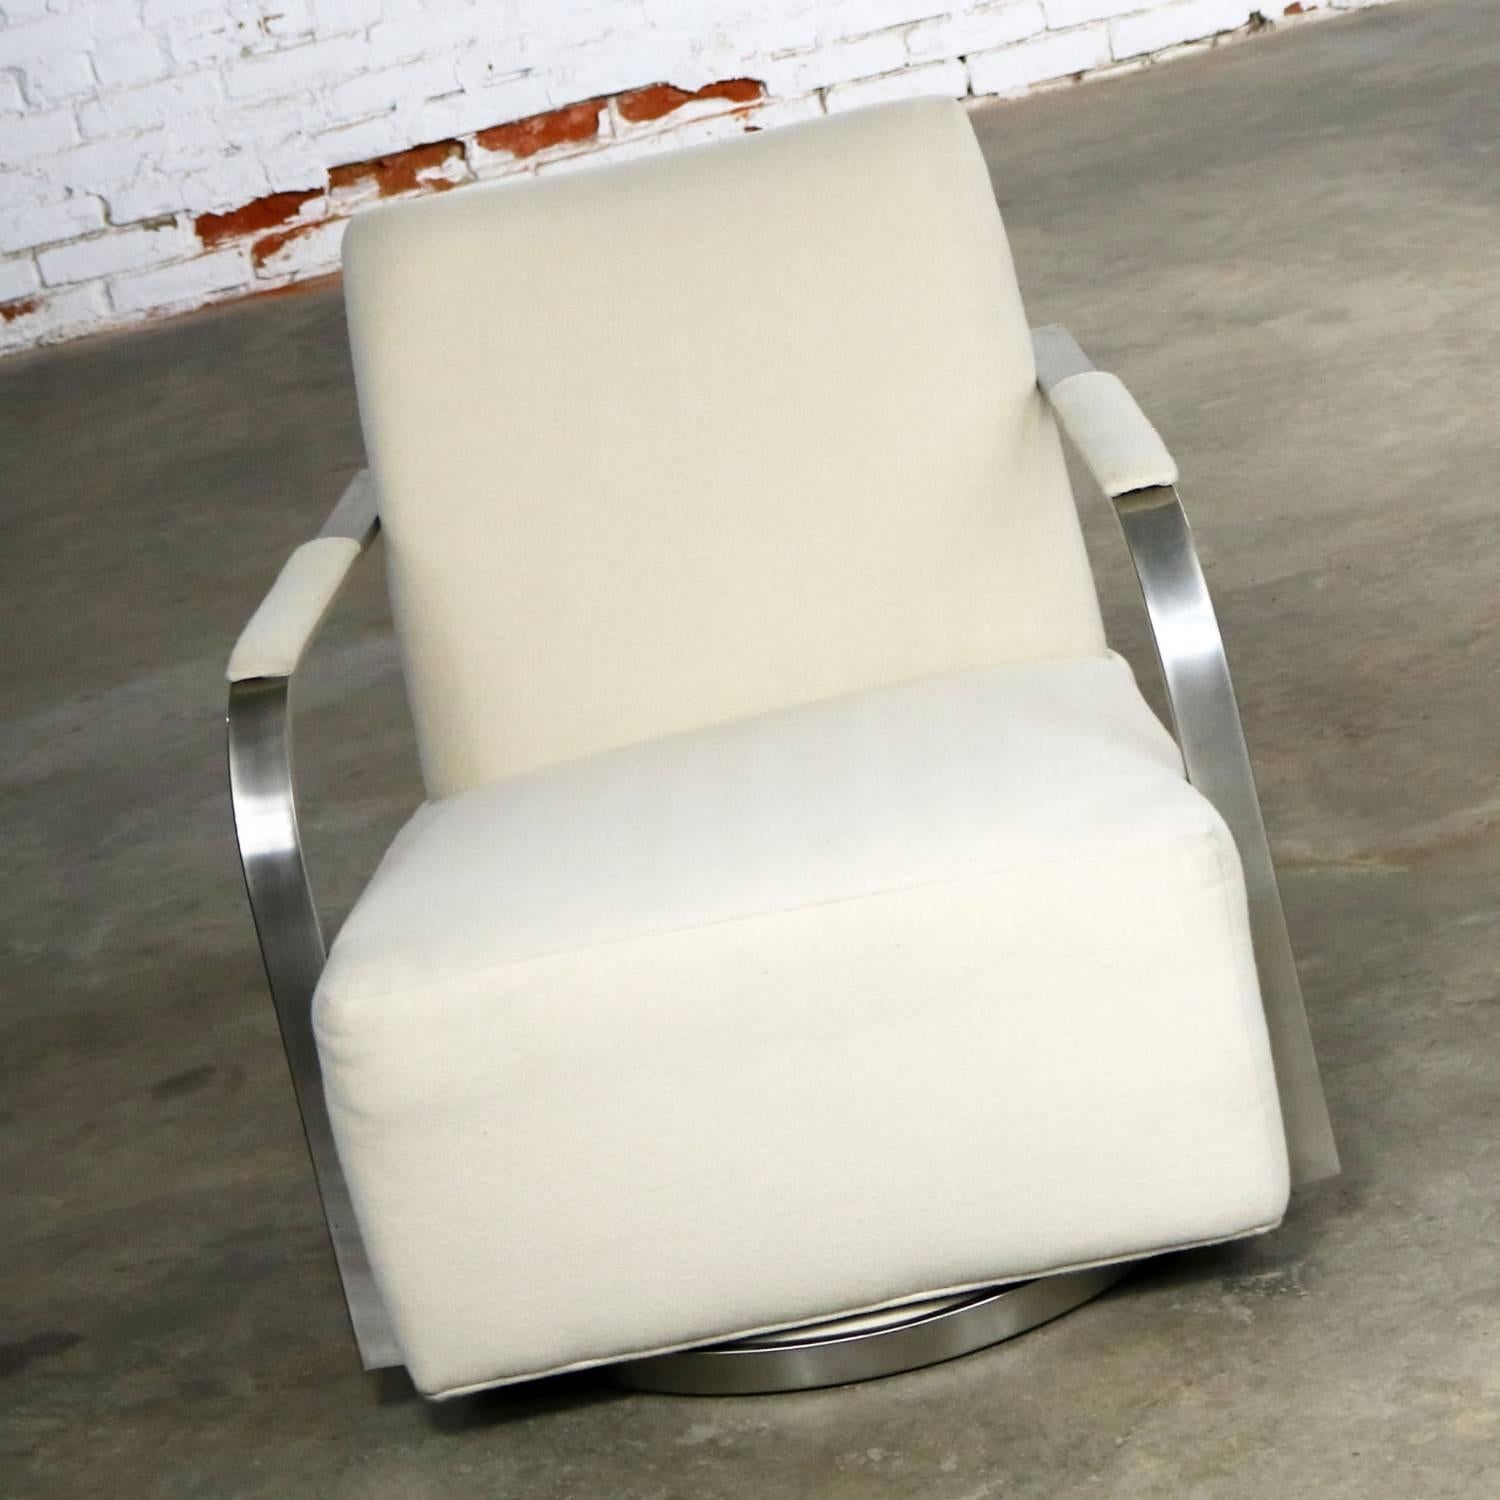 Wonderful 1086 Zac swivel lounge chair by Thayer Coggin in satin nickel and white wool-like fabric. This chair is recent production done in the style of Milo Baughman. It is in wonderful pre-owned condition, circa 21st century.

Handsome and done